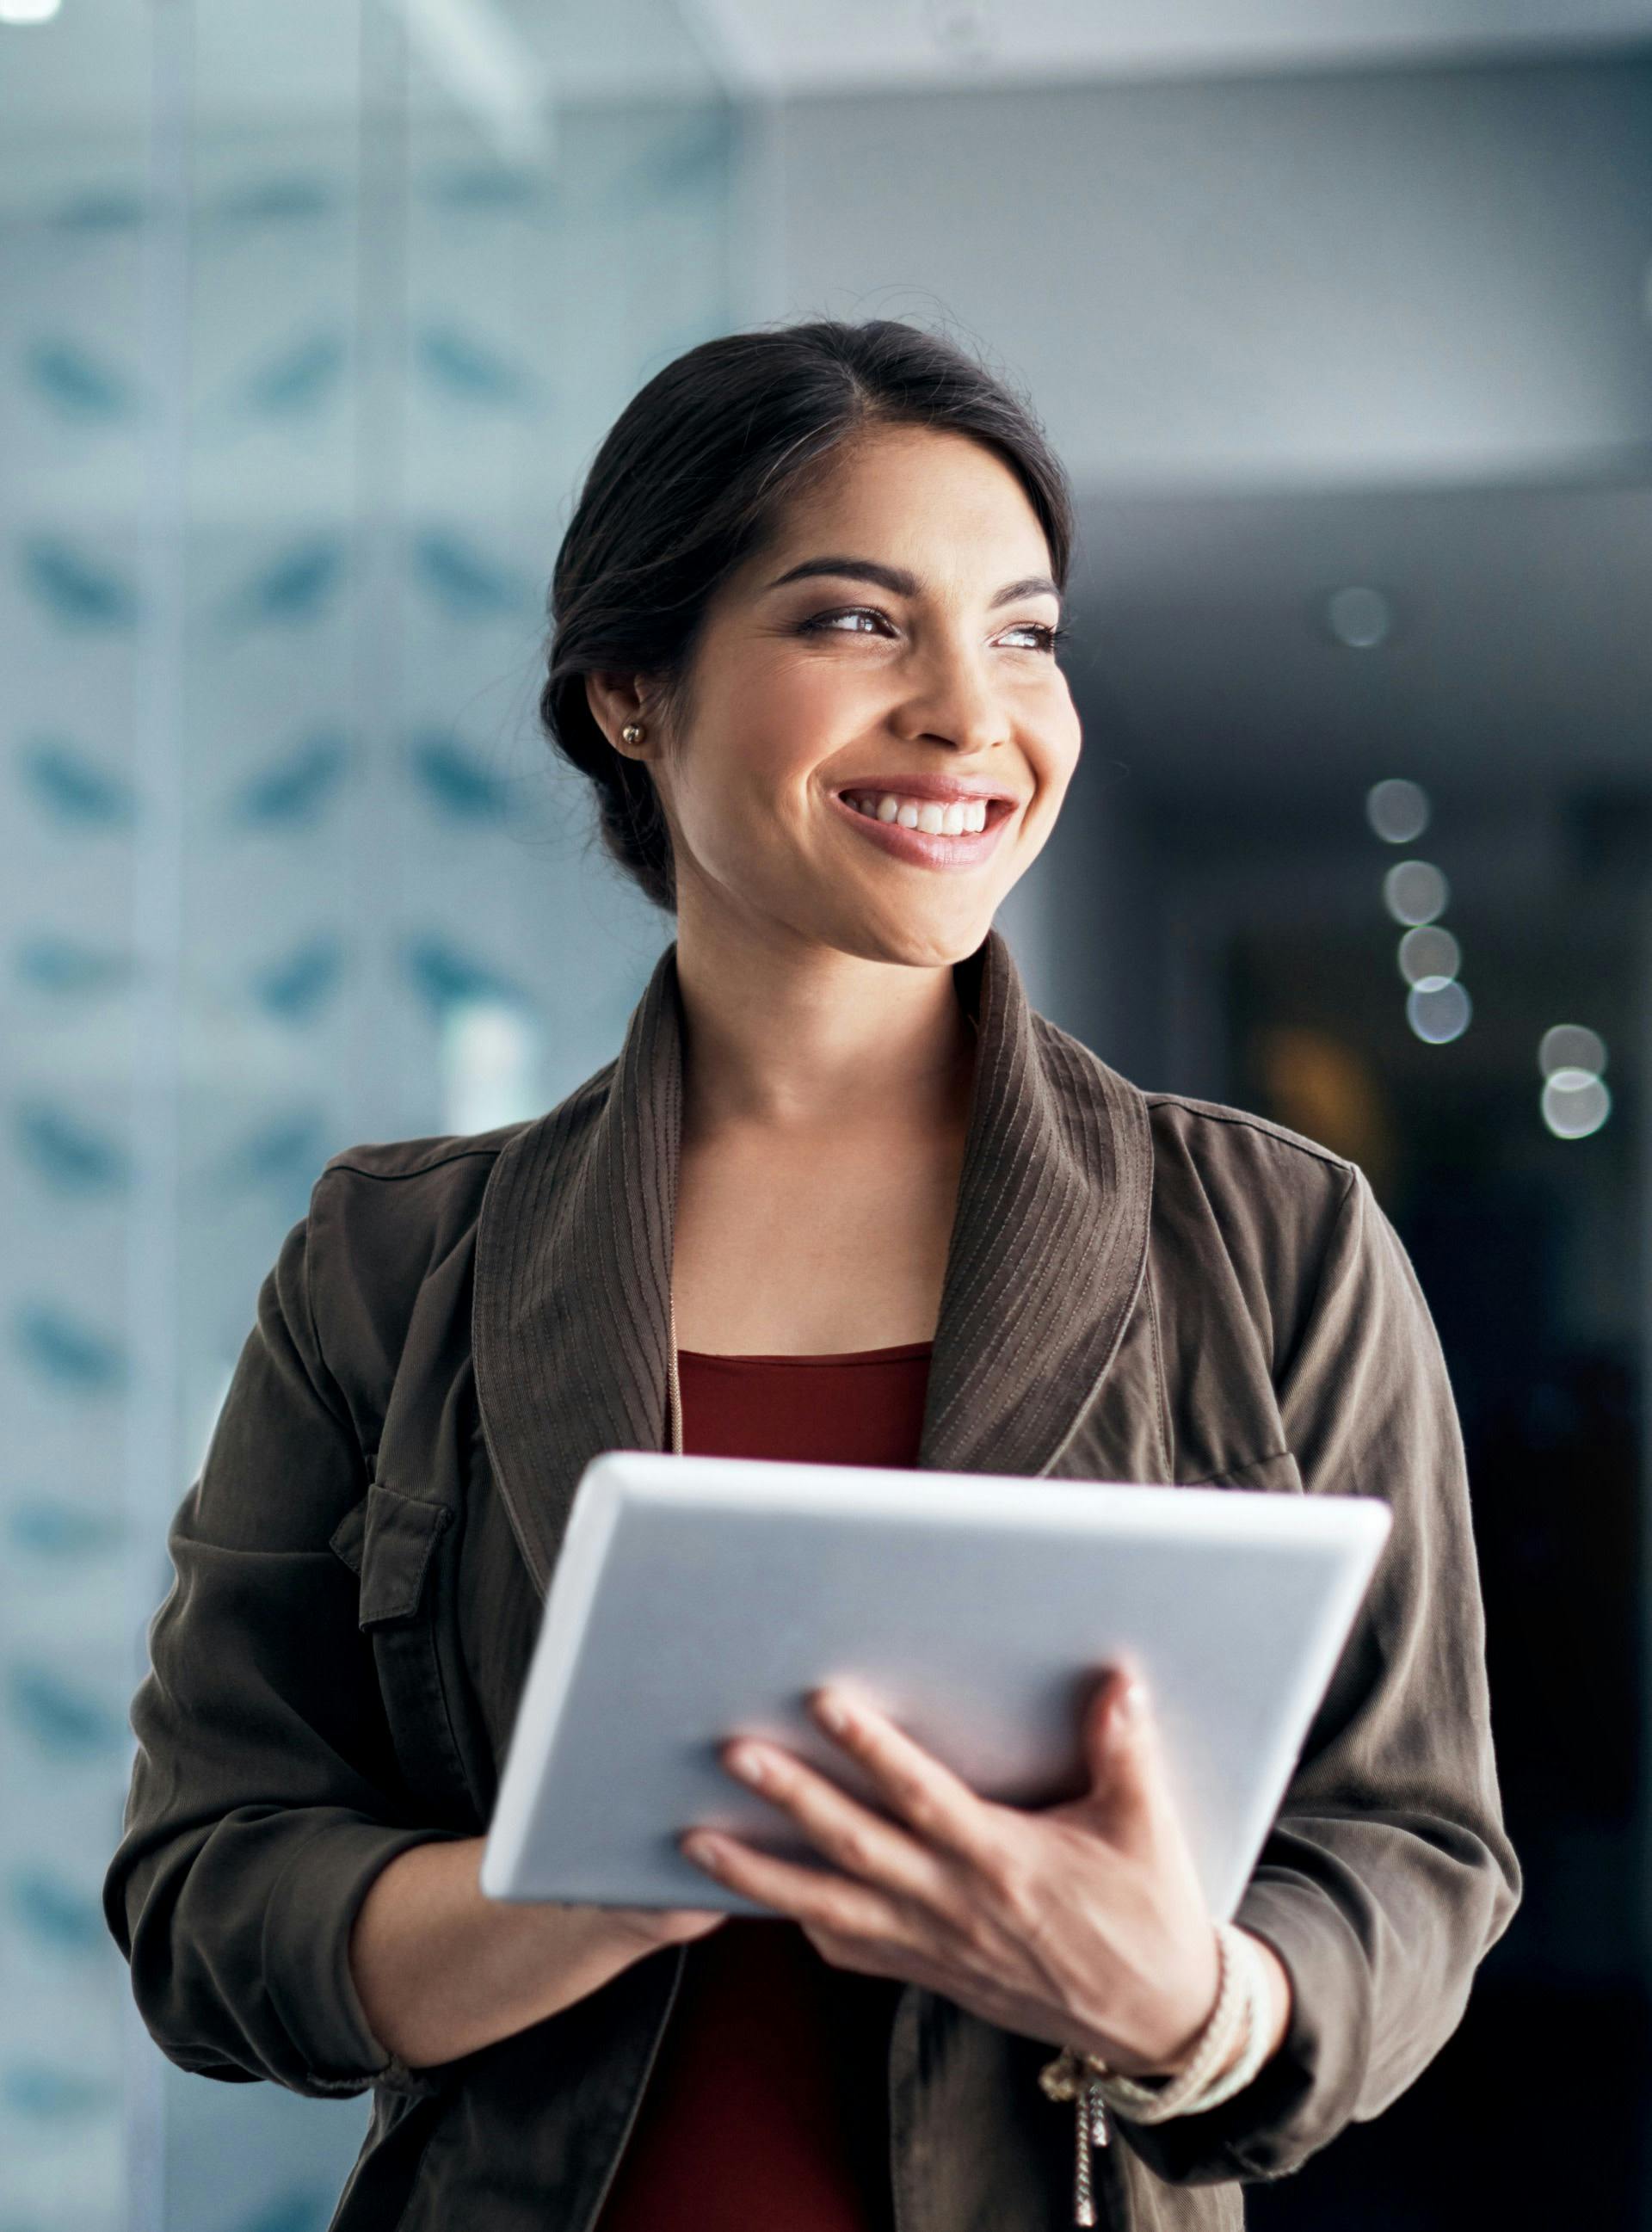 Woman standing and smiling holding a tablet